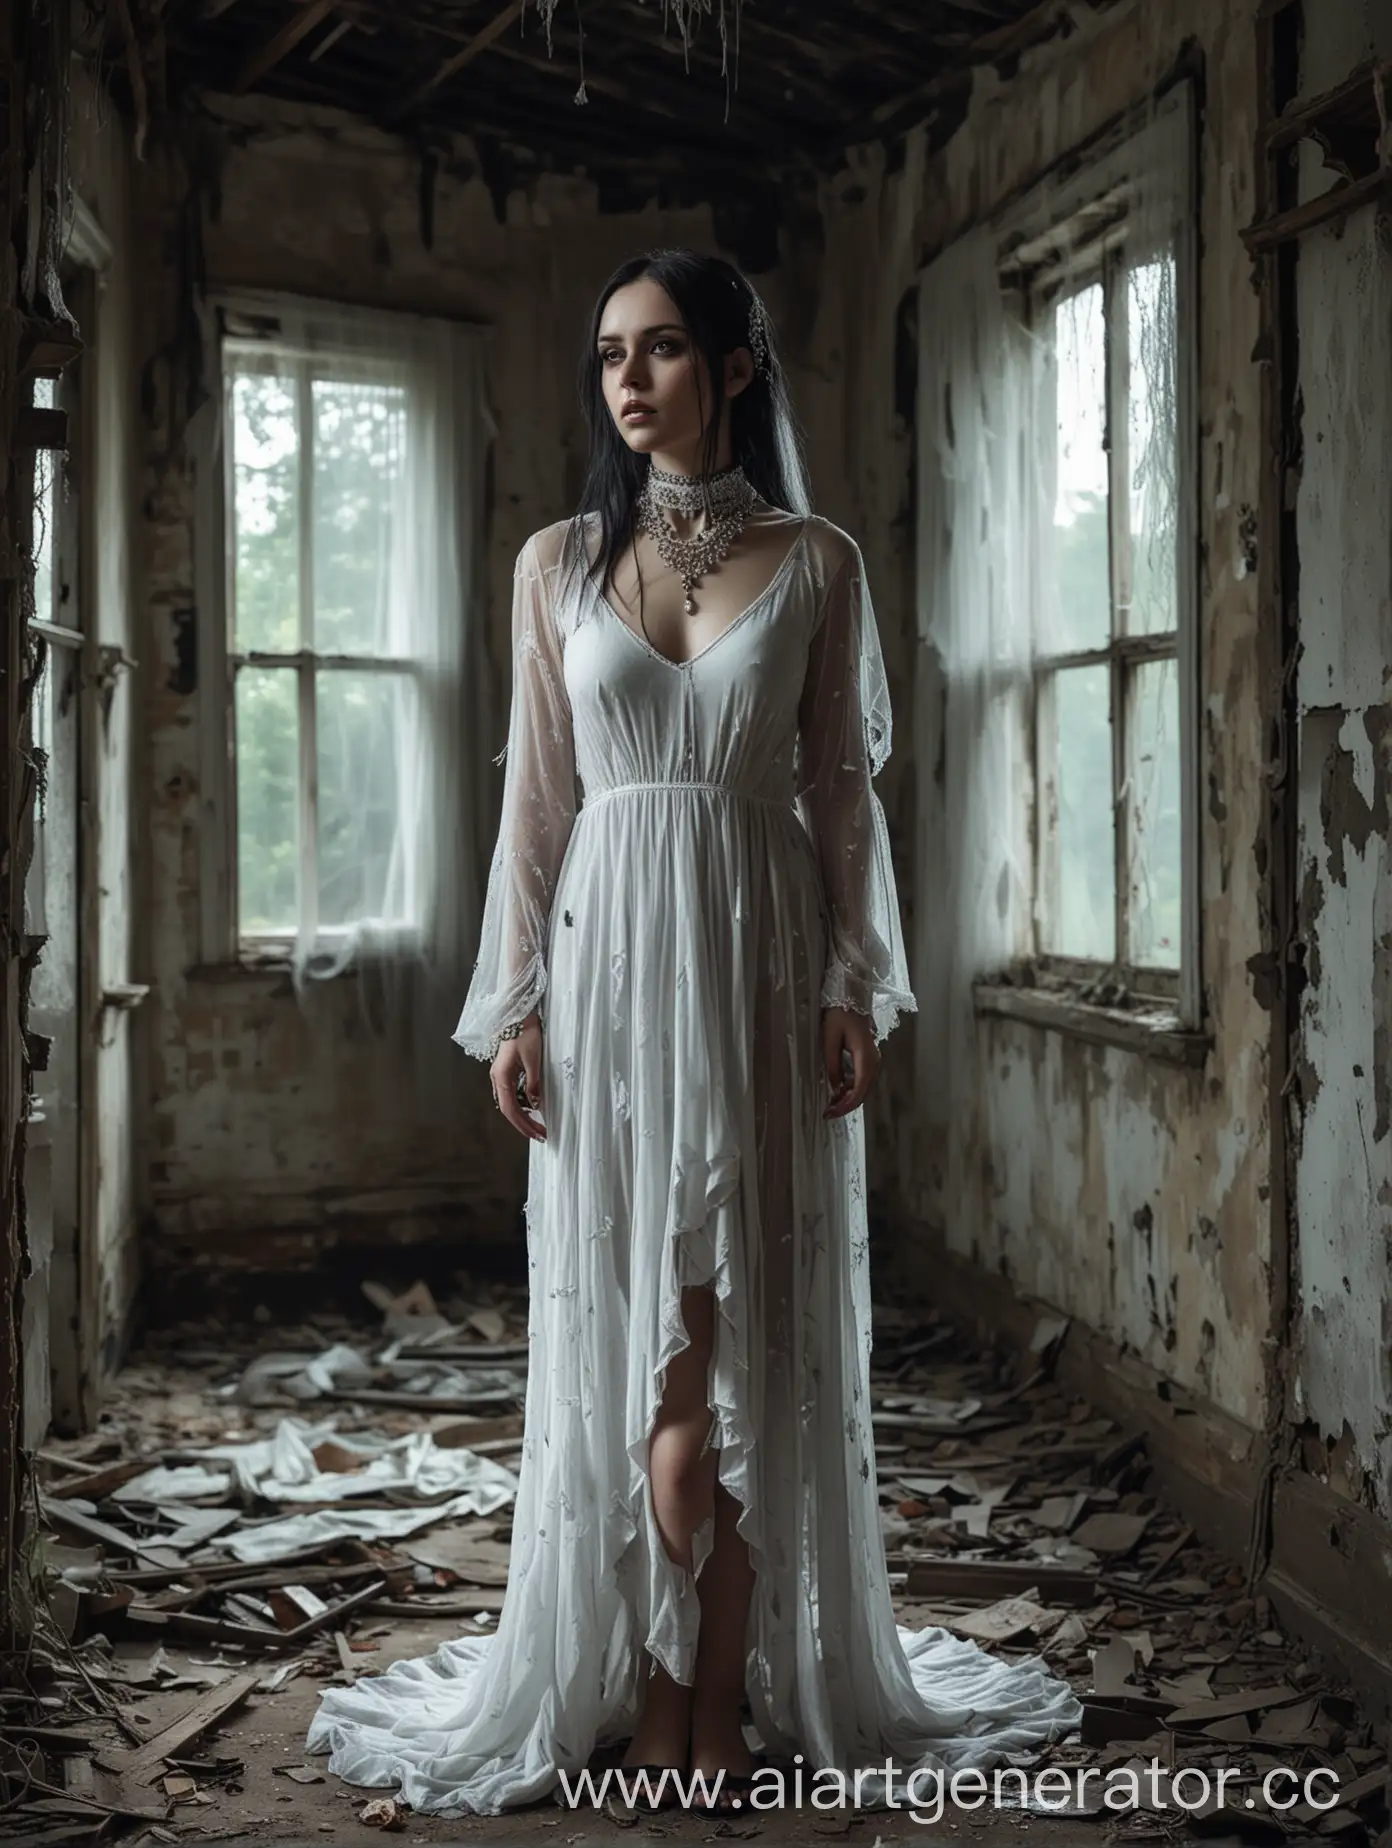 Beautiful hot gothic girl dressed as a ghost in abandoned house, see through white dress, gothic jewellery 